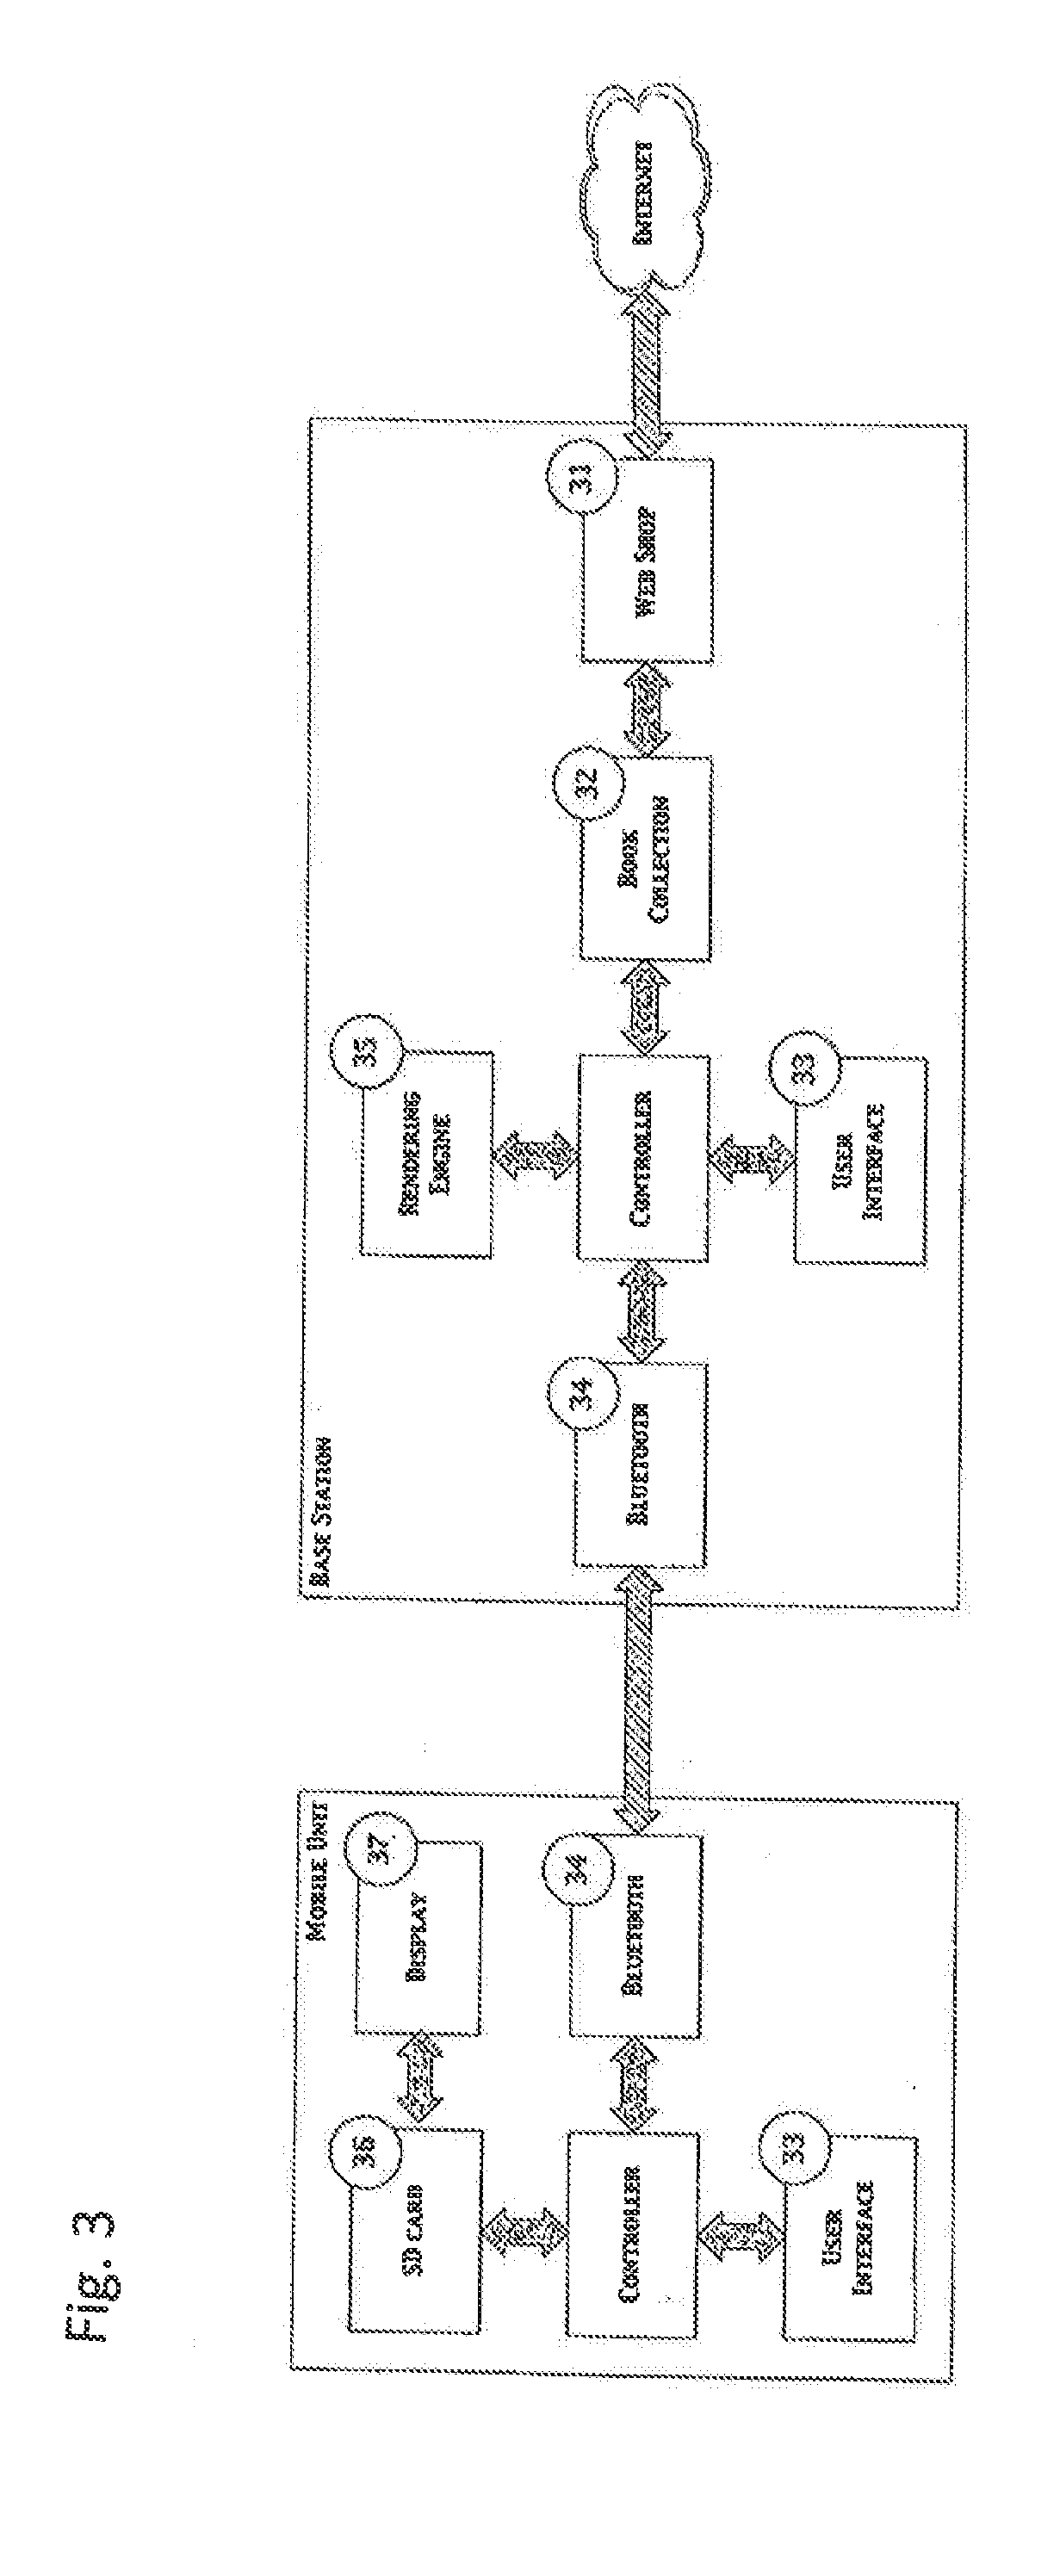 System and infrastructure for displaying digital text documents on a mobile device